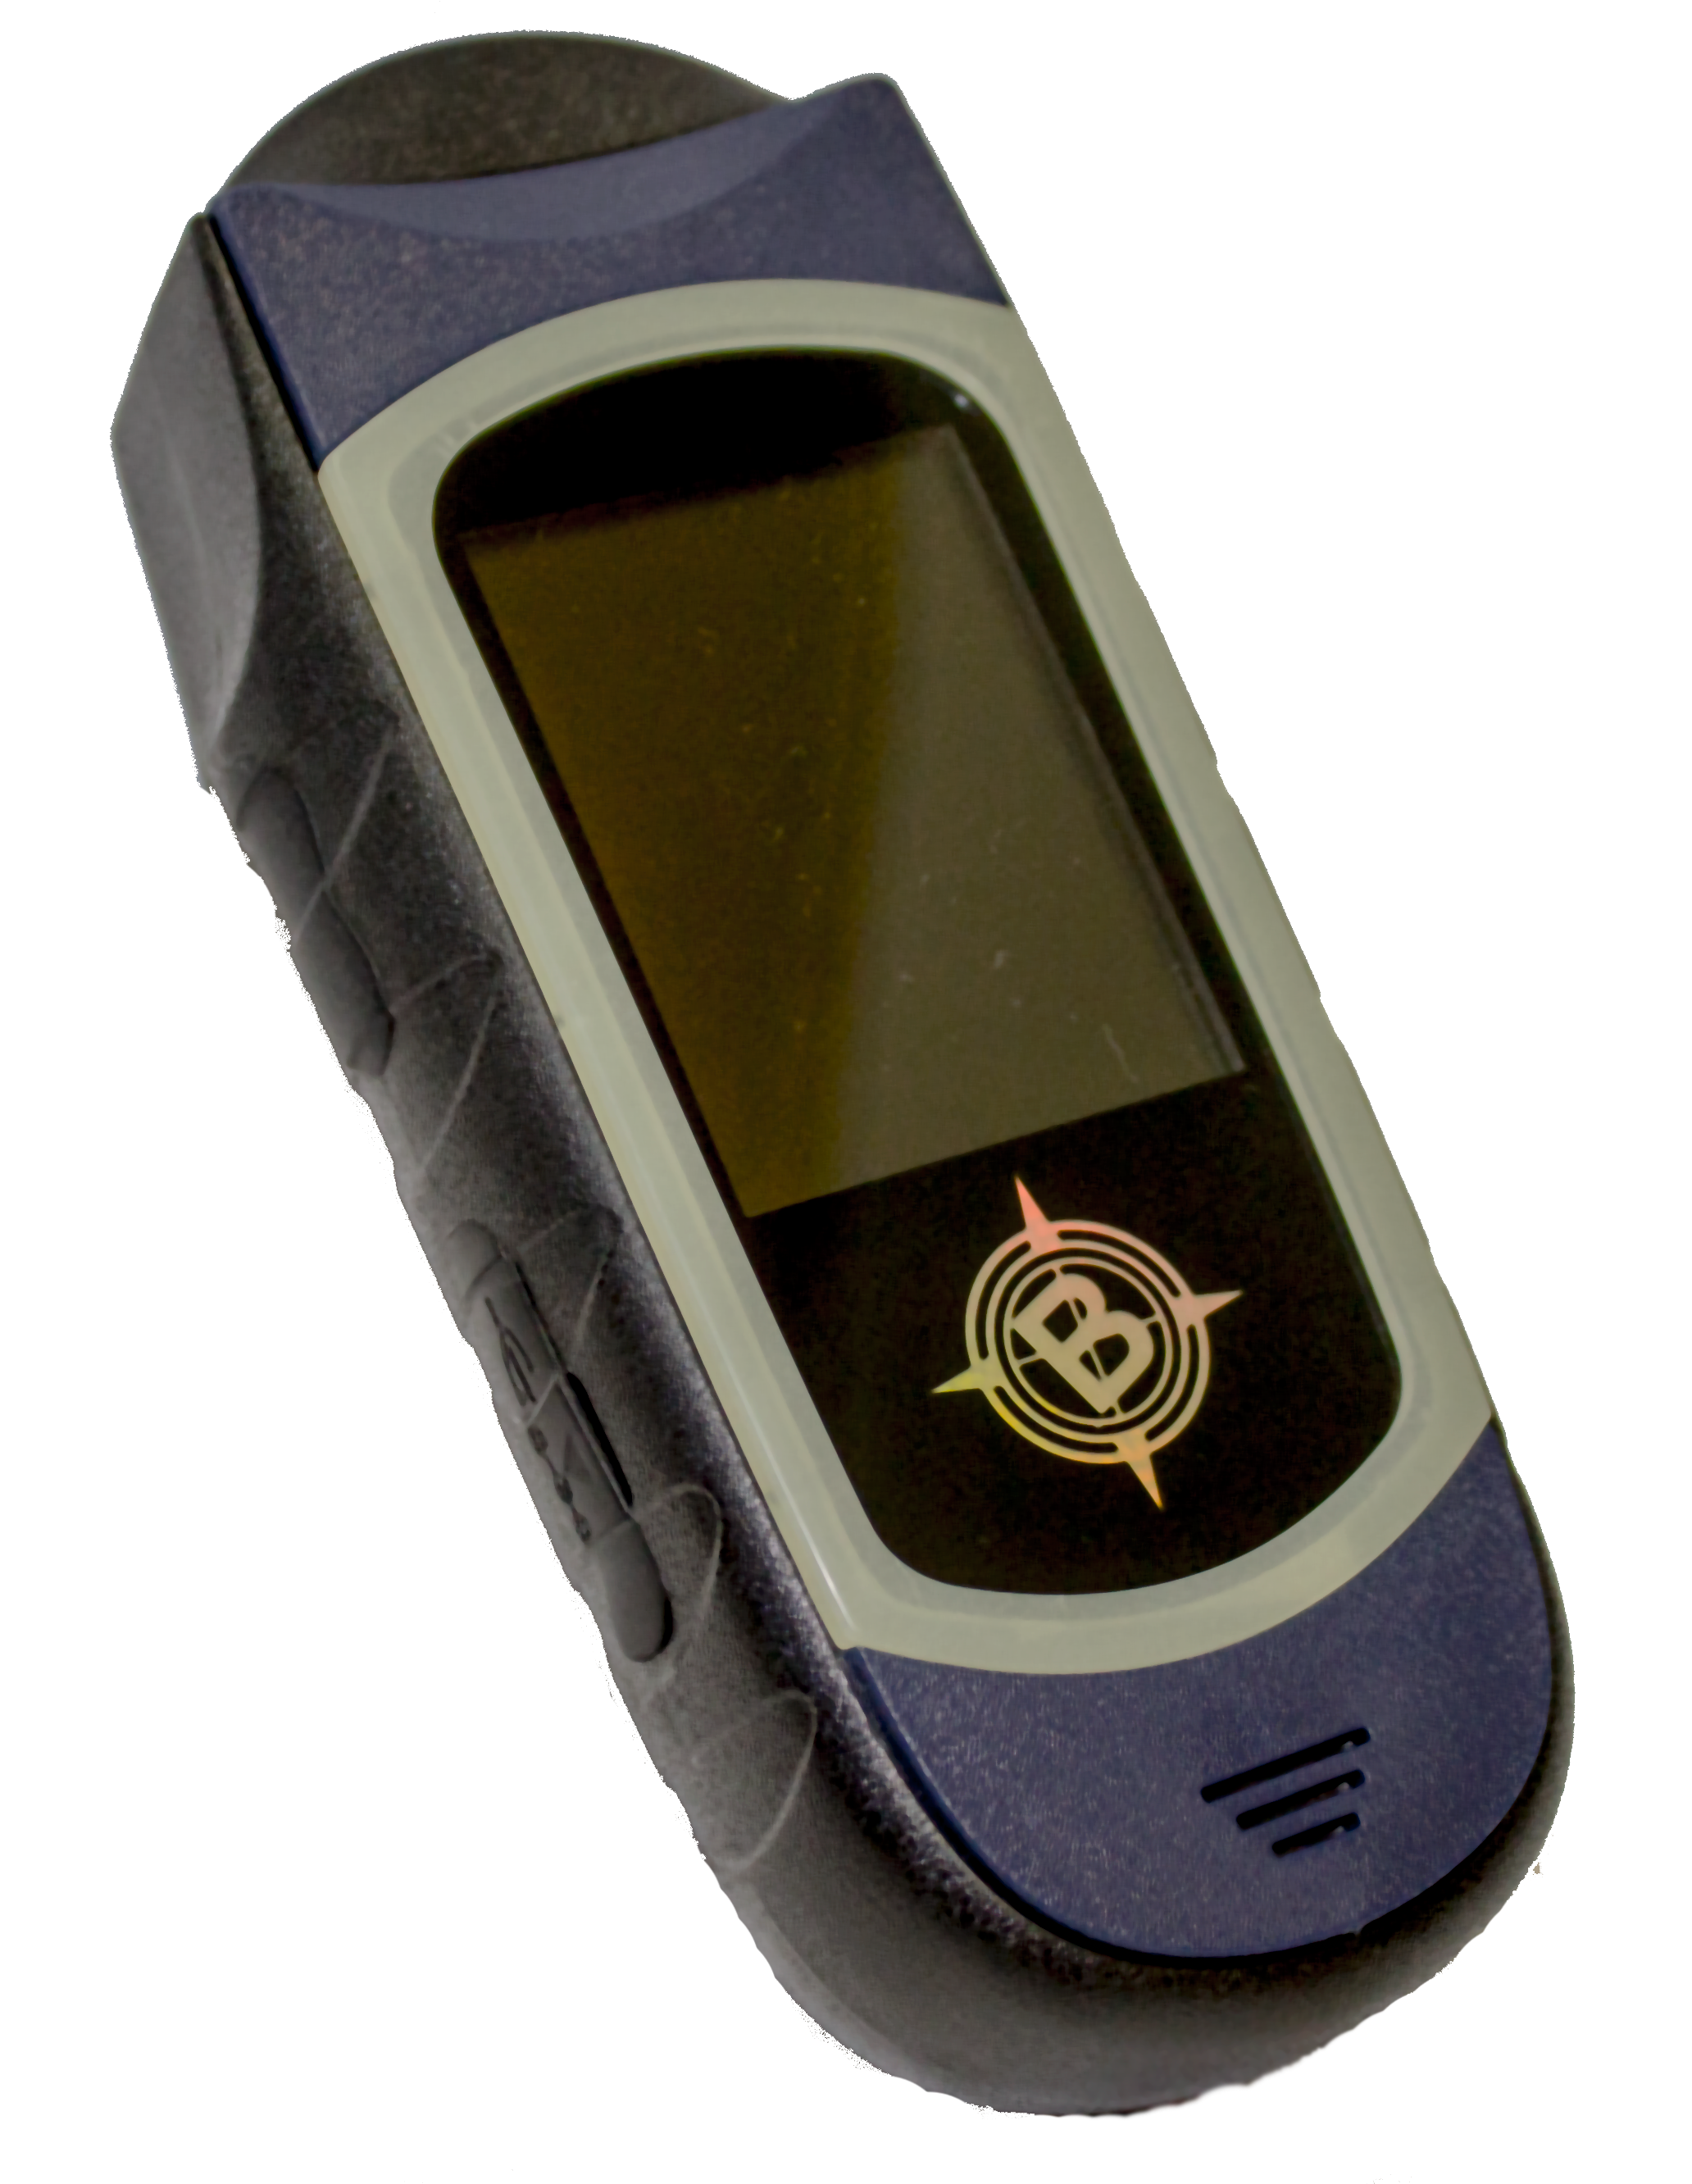 Portable Breathalyzers for Law Enforcement and Private Use